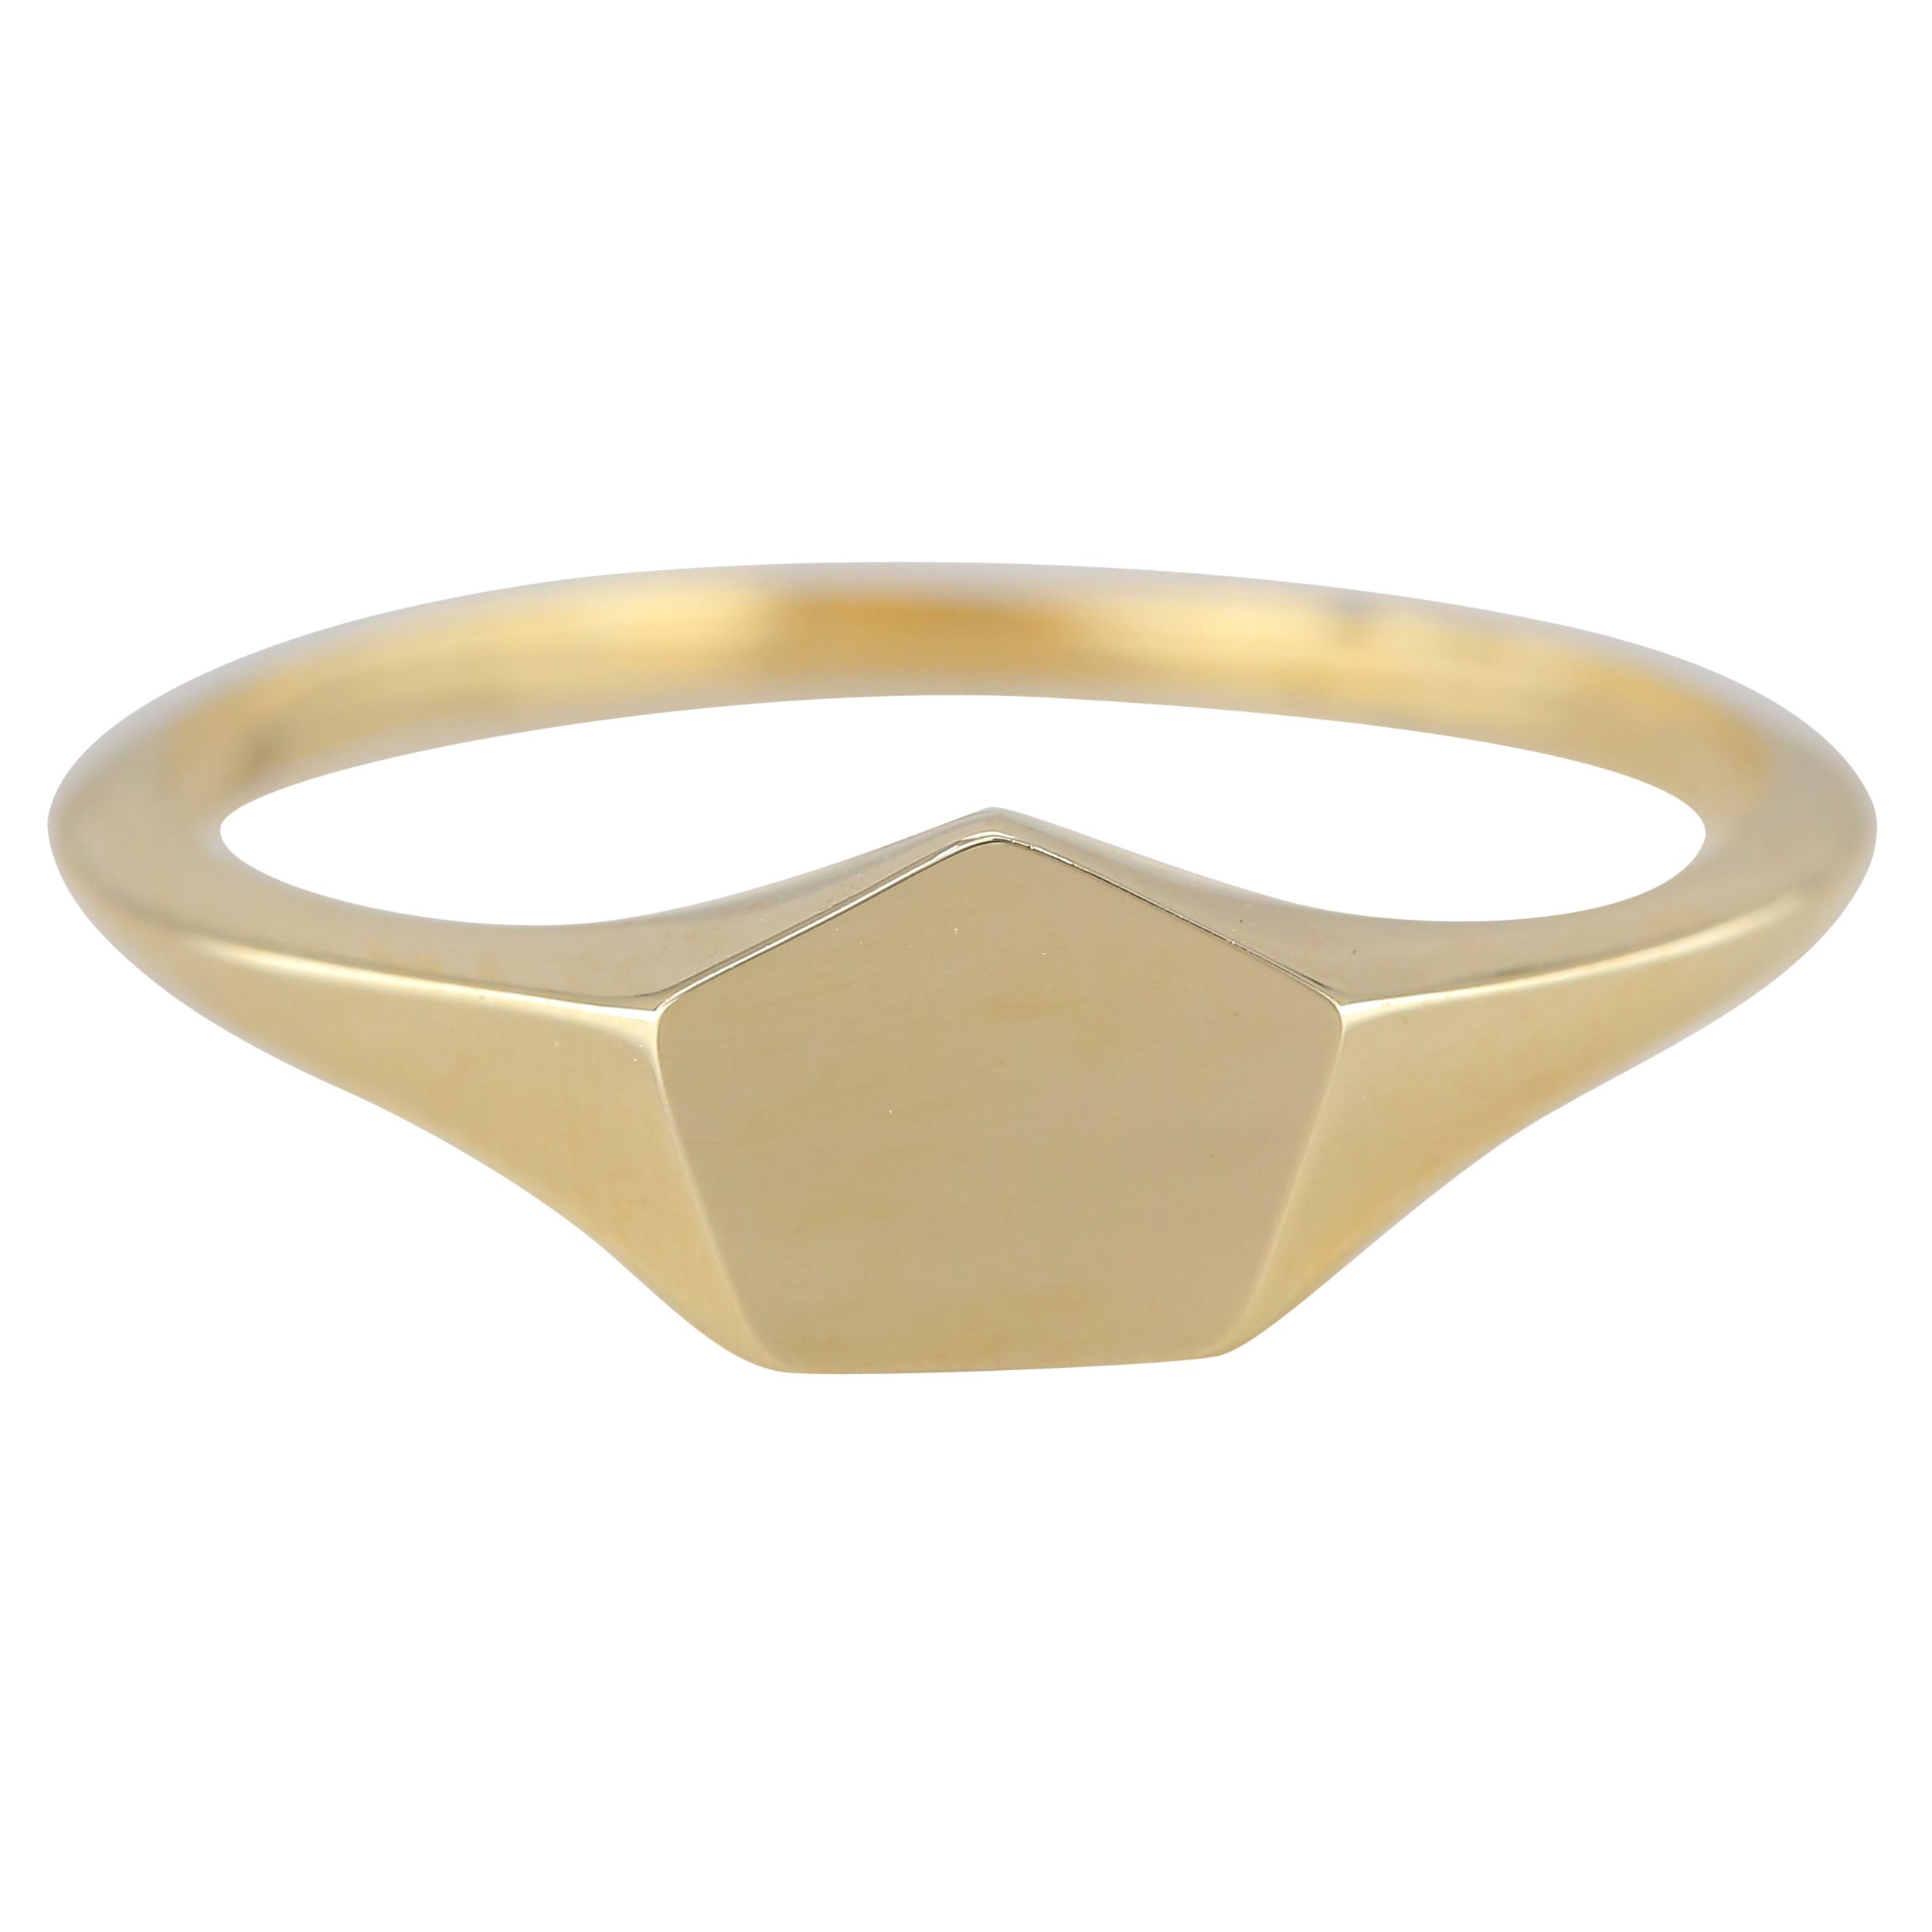 For Sale:  Pinky Signet Ring, 14K Gold Pinky Pentagon Signet Ring, Small Pentagonal Ring